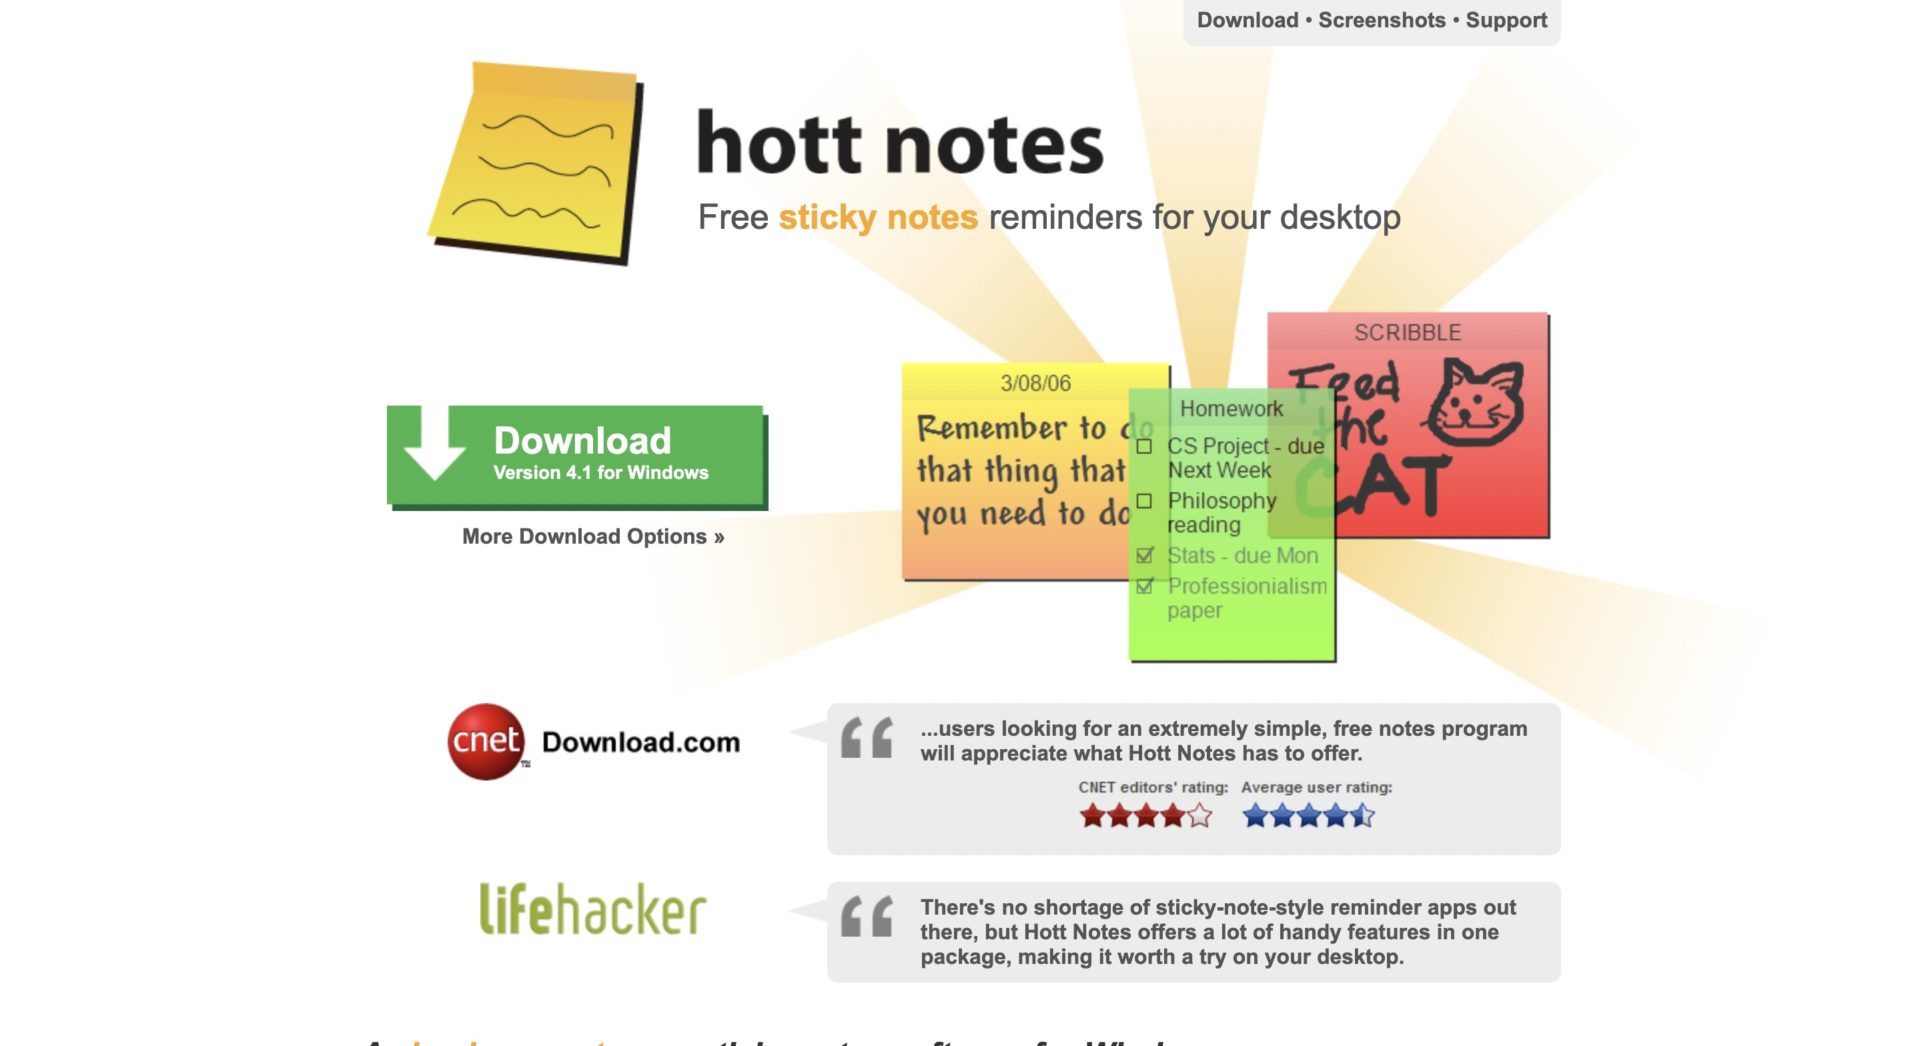 Top page of hott notes